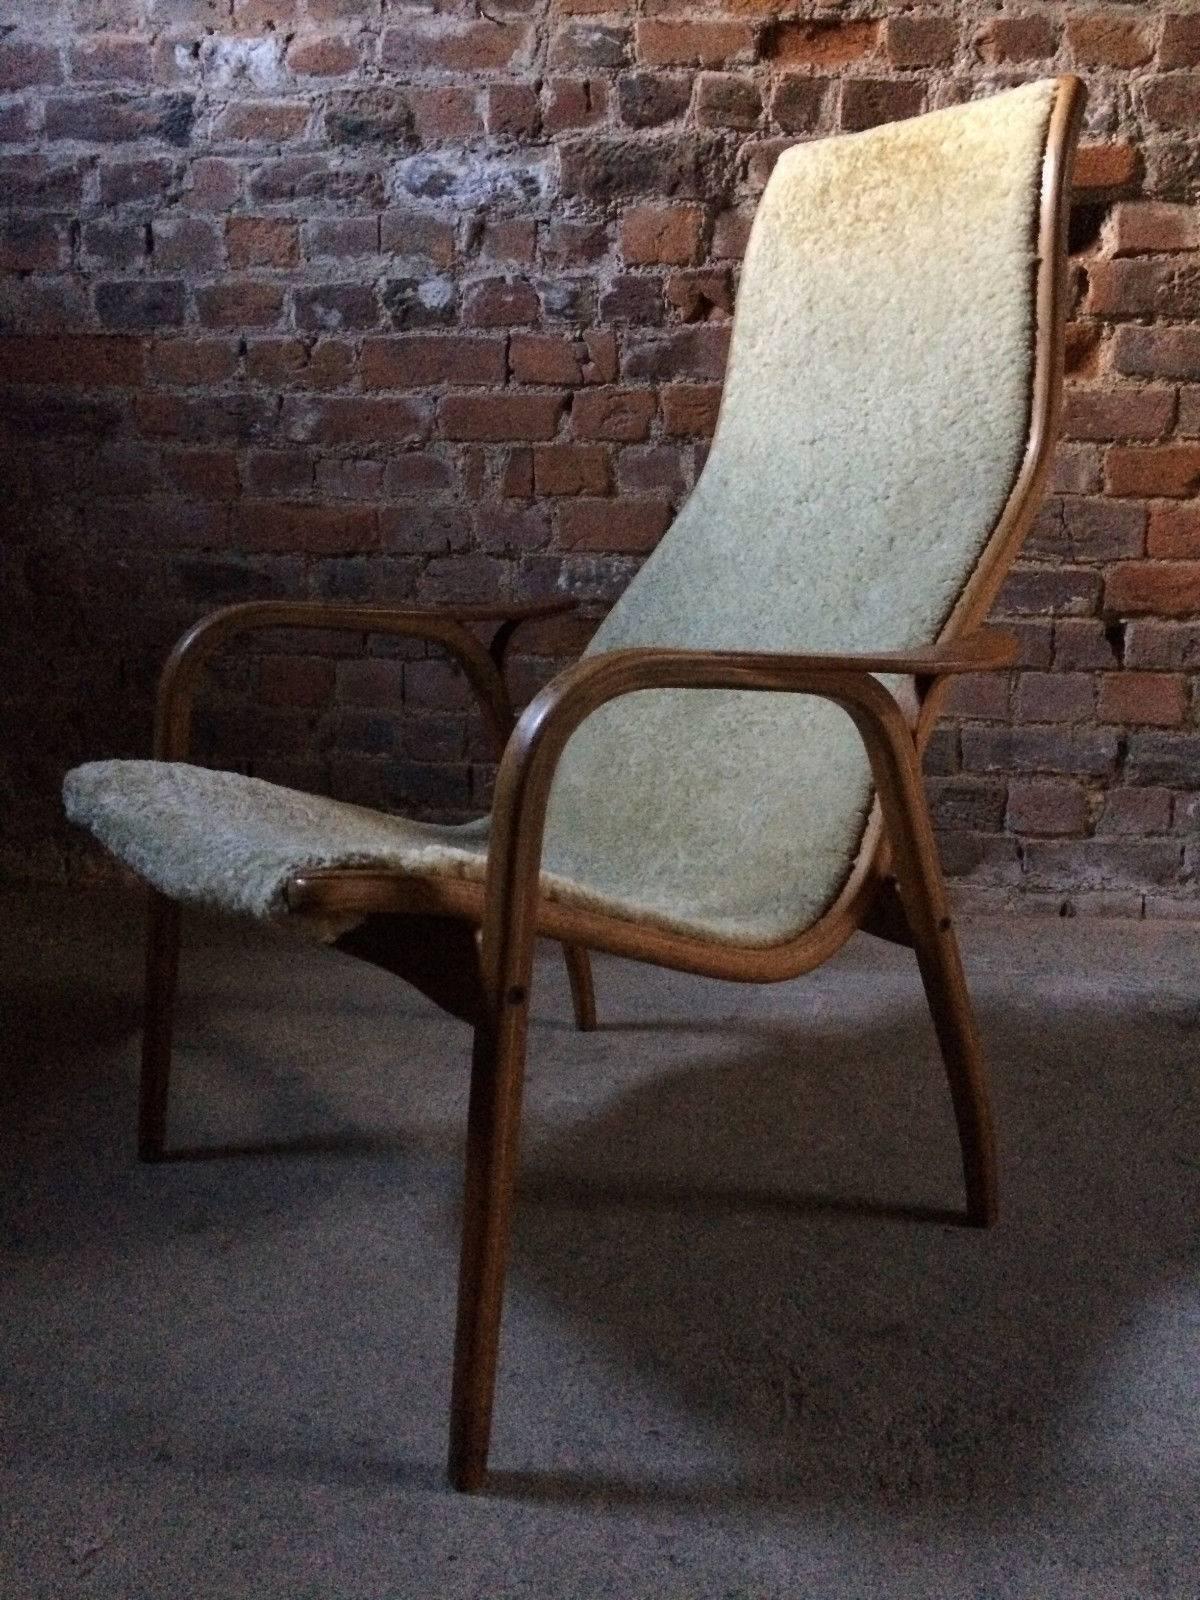 Midcentury design at its best, beautifully elegant lightweight 'Lamino' lounge chair designed by Yngve Ekström and produced by Swedese, Sweden in the 1960s featuring a teak frame and cream sheepskin upholstery.
 